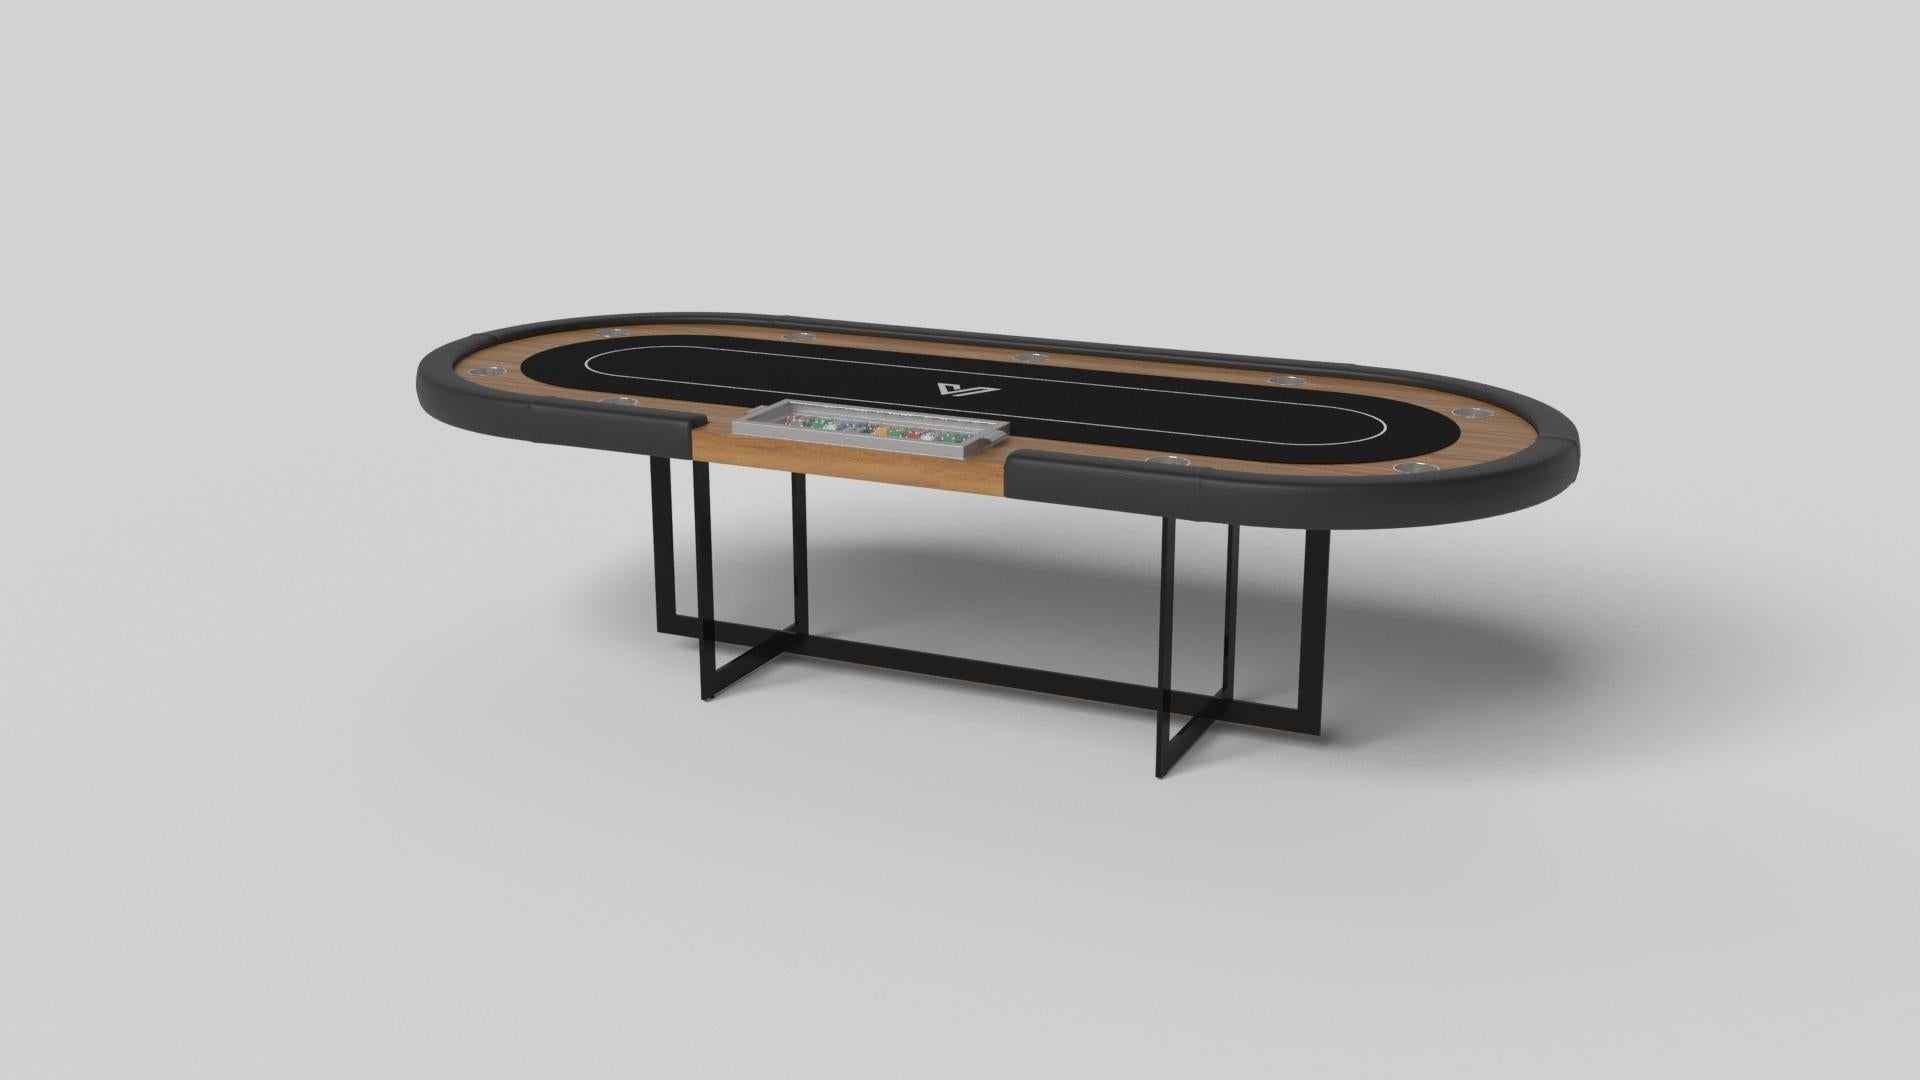 With an open metal foundation, our Beso table is a unique expression of contemporary forms and negative space. This poker table is handcrafted by our master artisans with a rectangle-in-rectangle base that echoes the angles and edges of a regulation